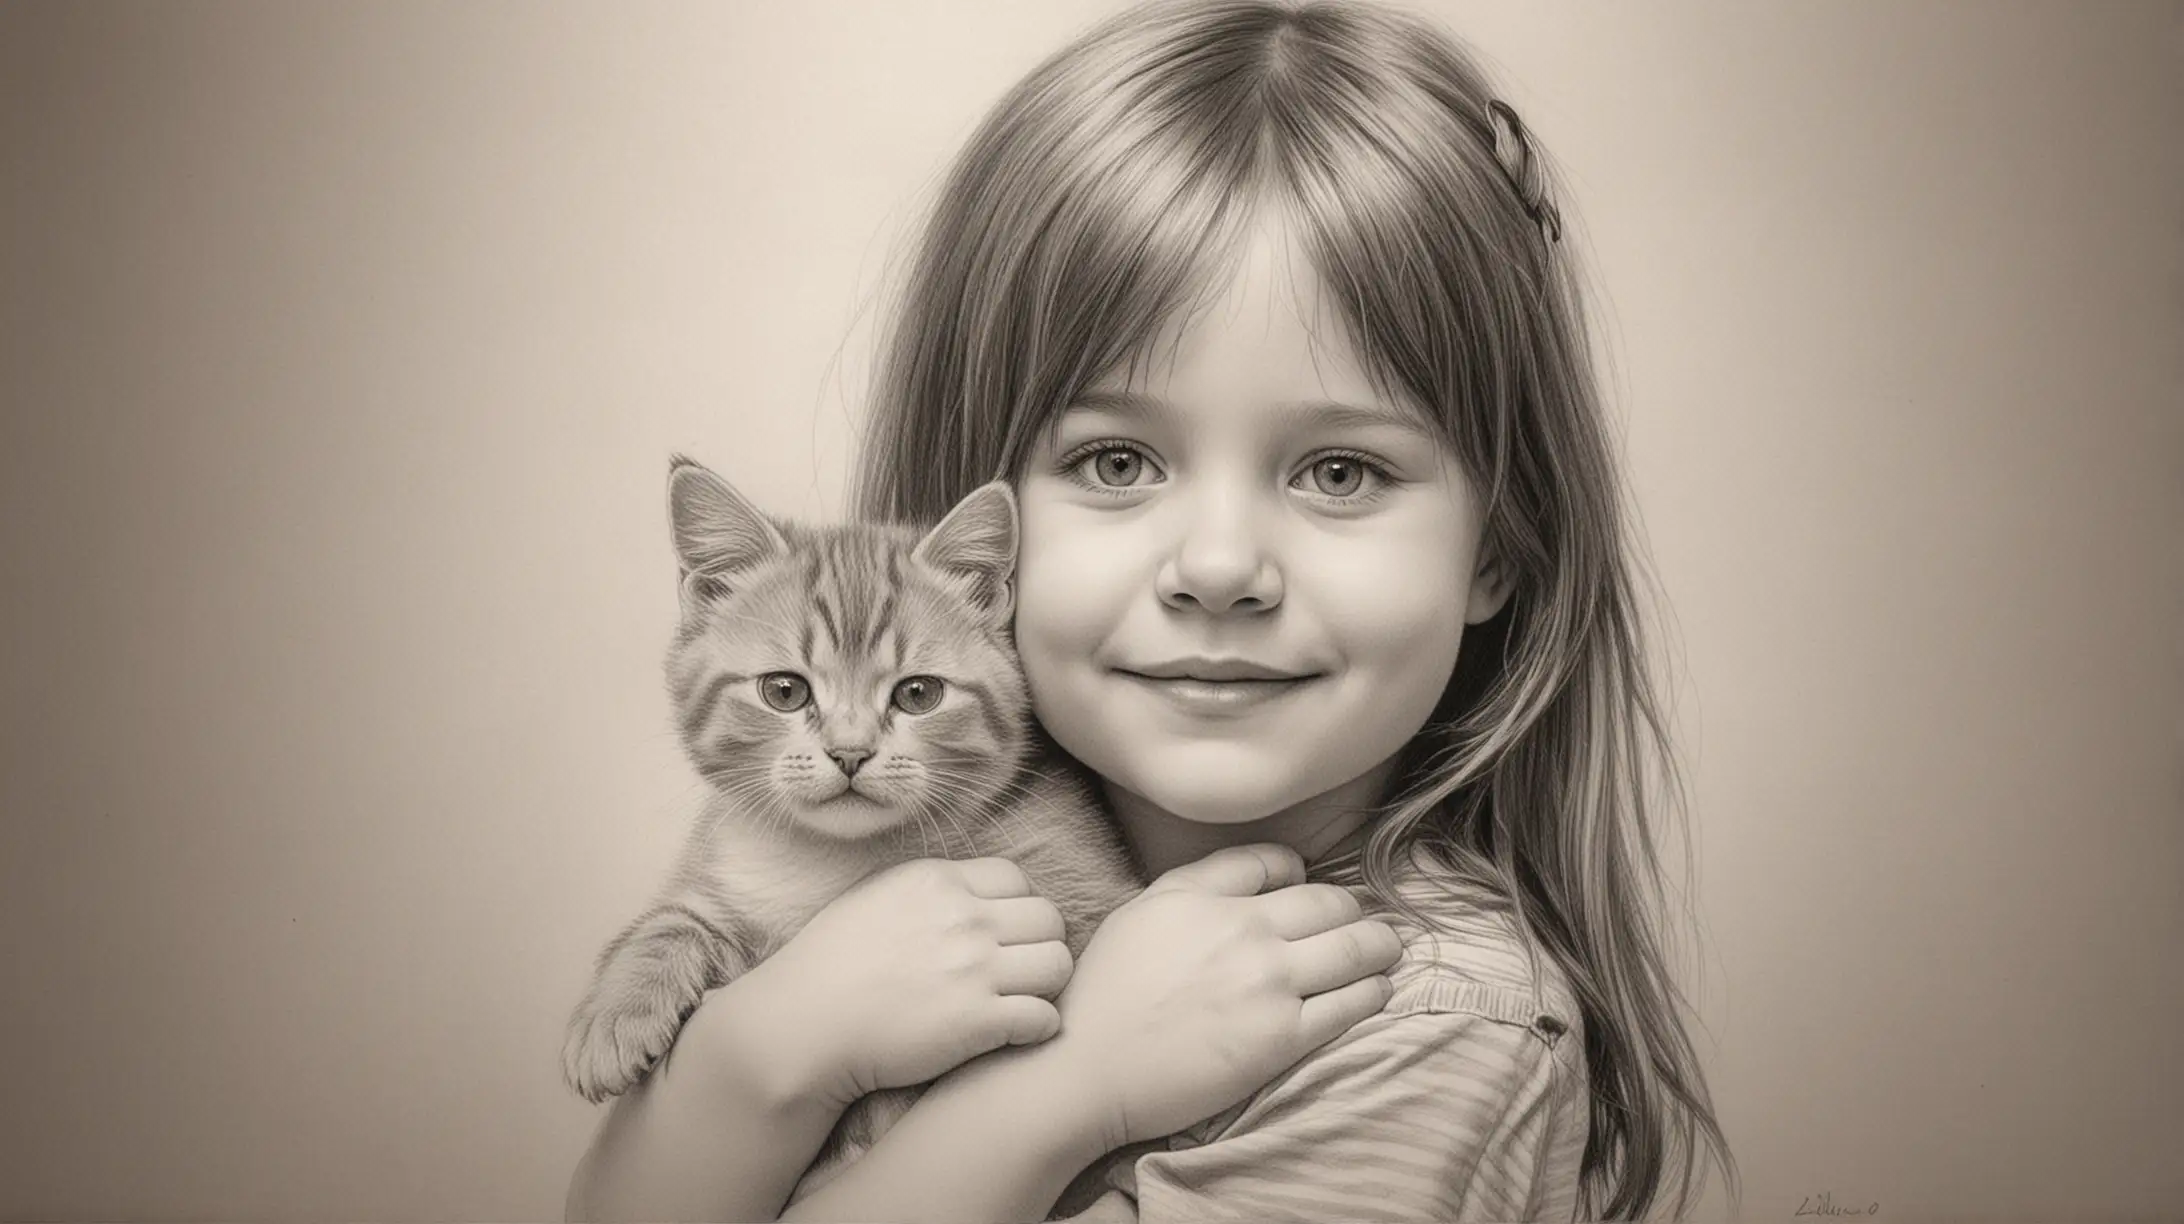 Adorable Little Girl Holding a Cute Cat Heartwarming Pencil Drawing